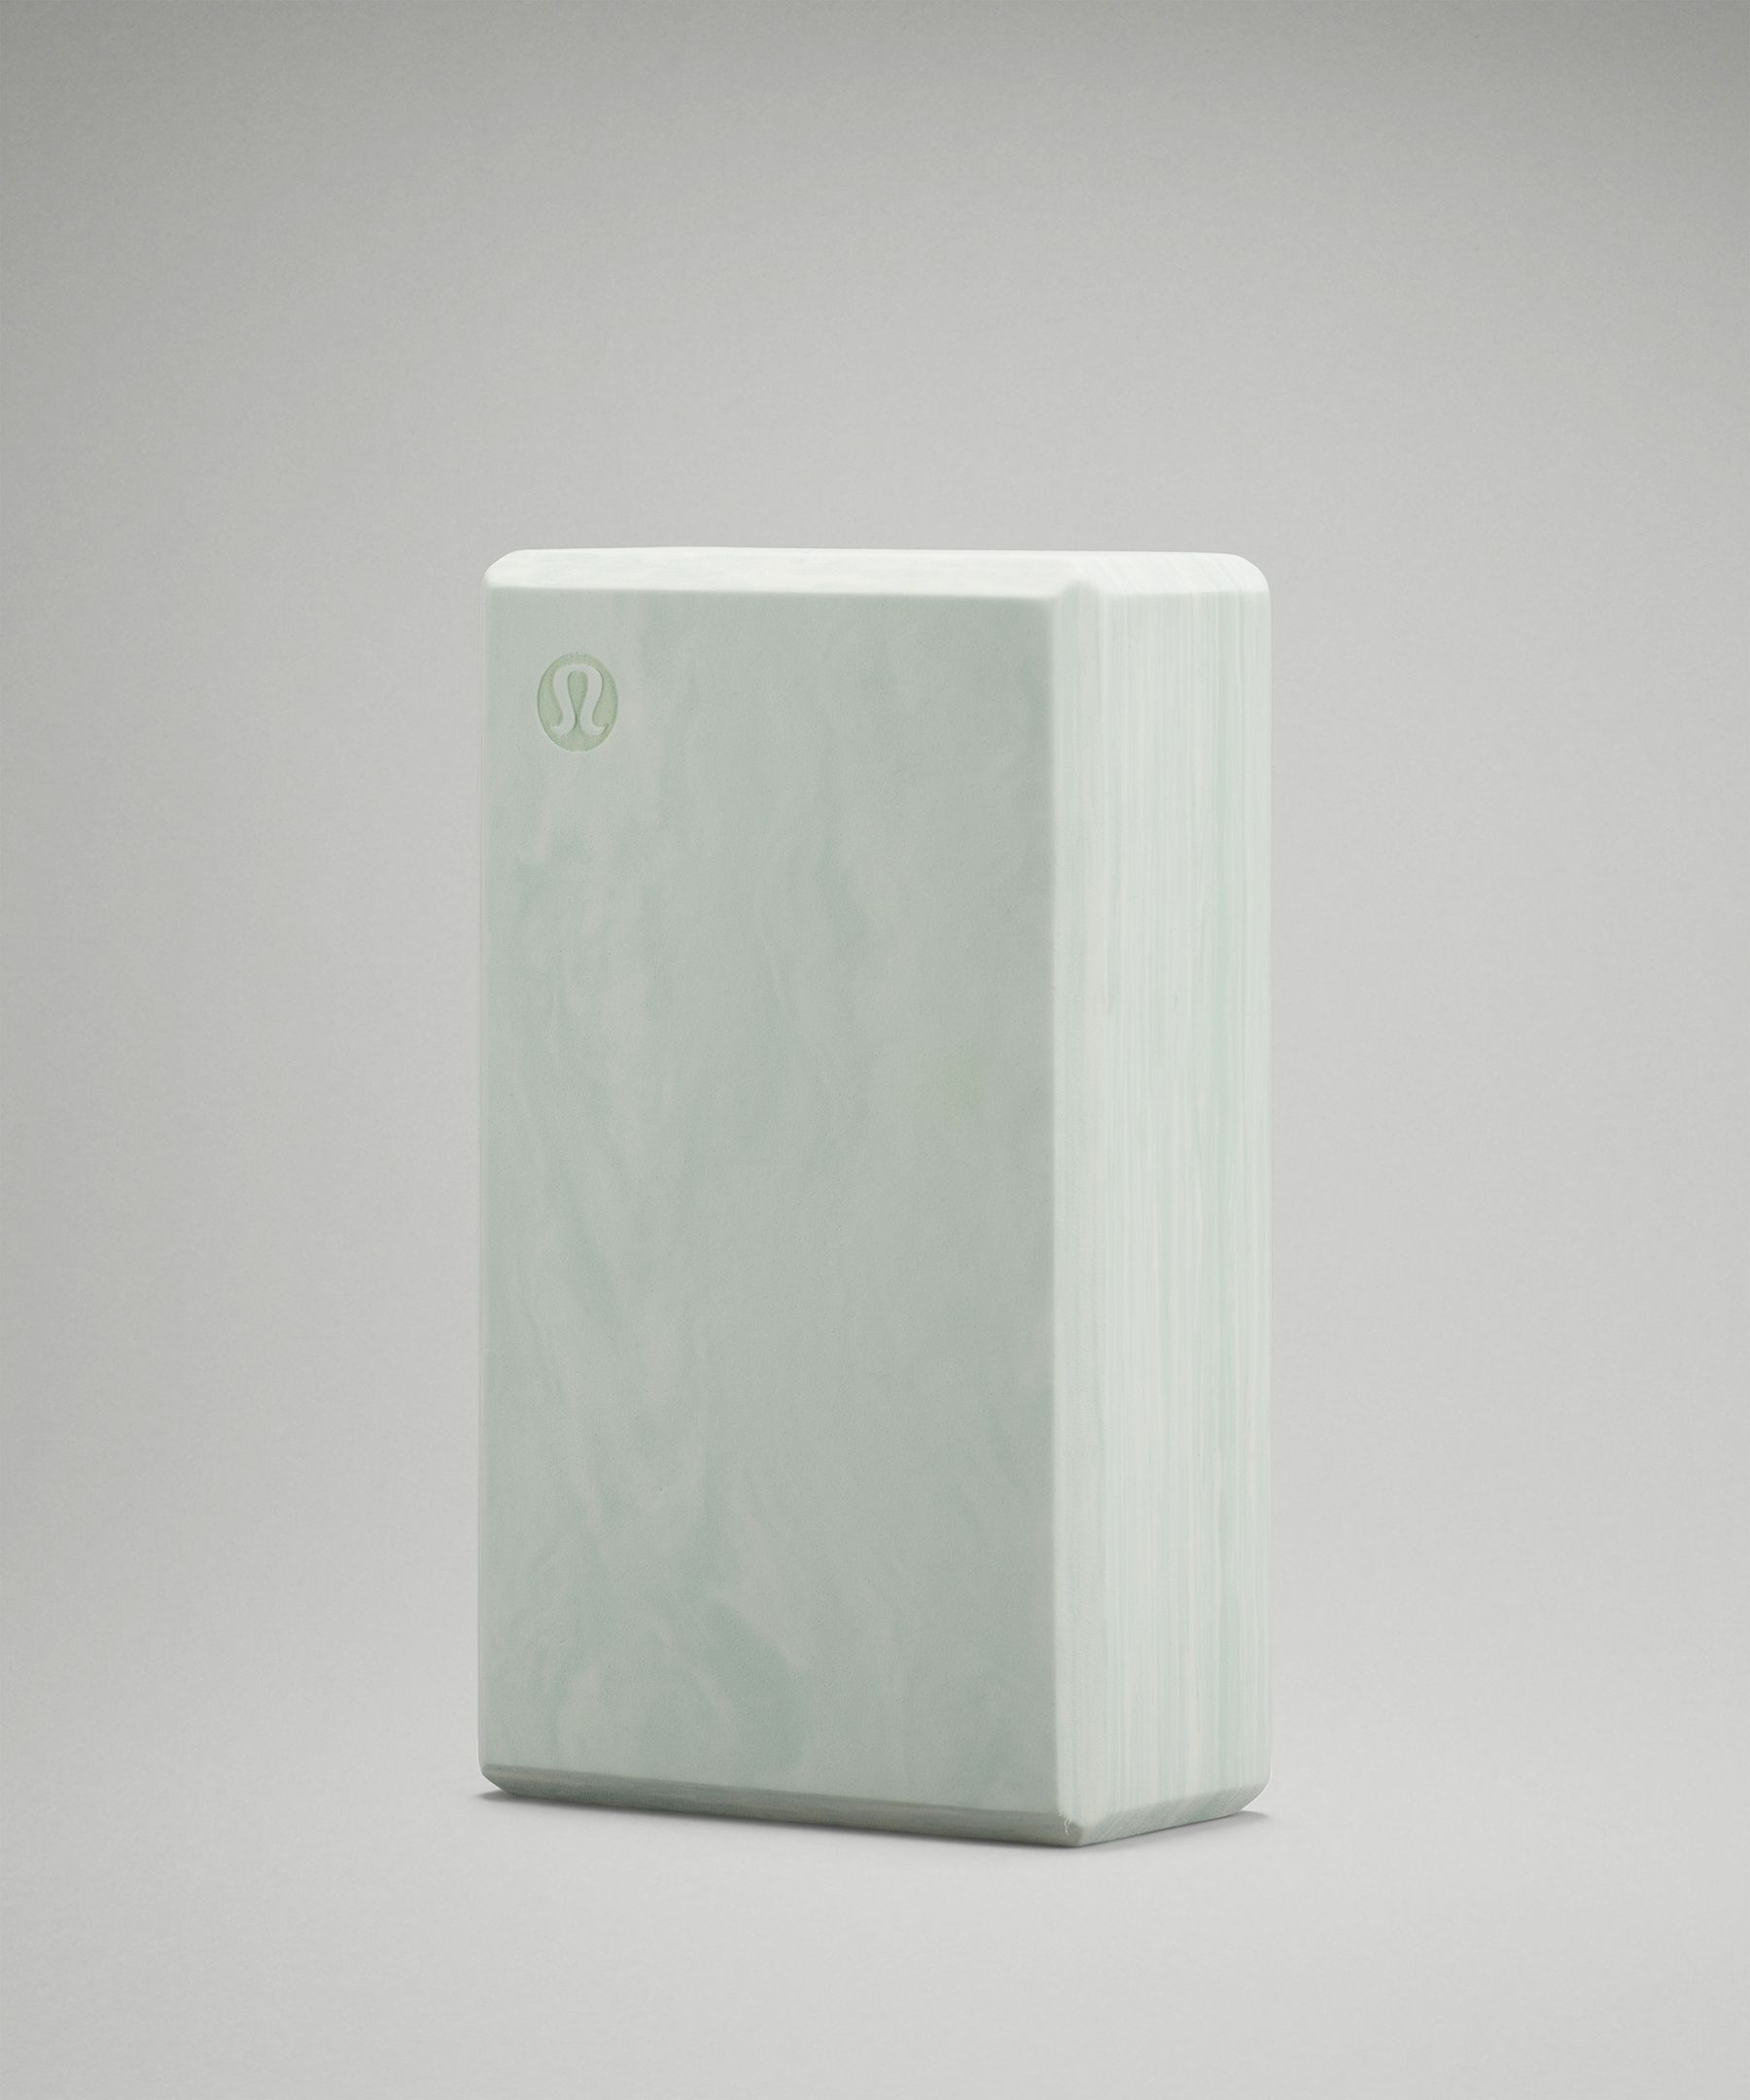 Lululemon Lift And Lengthen Yoga Block Marbled In Delicate Mint/white